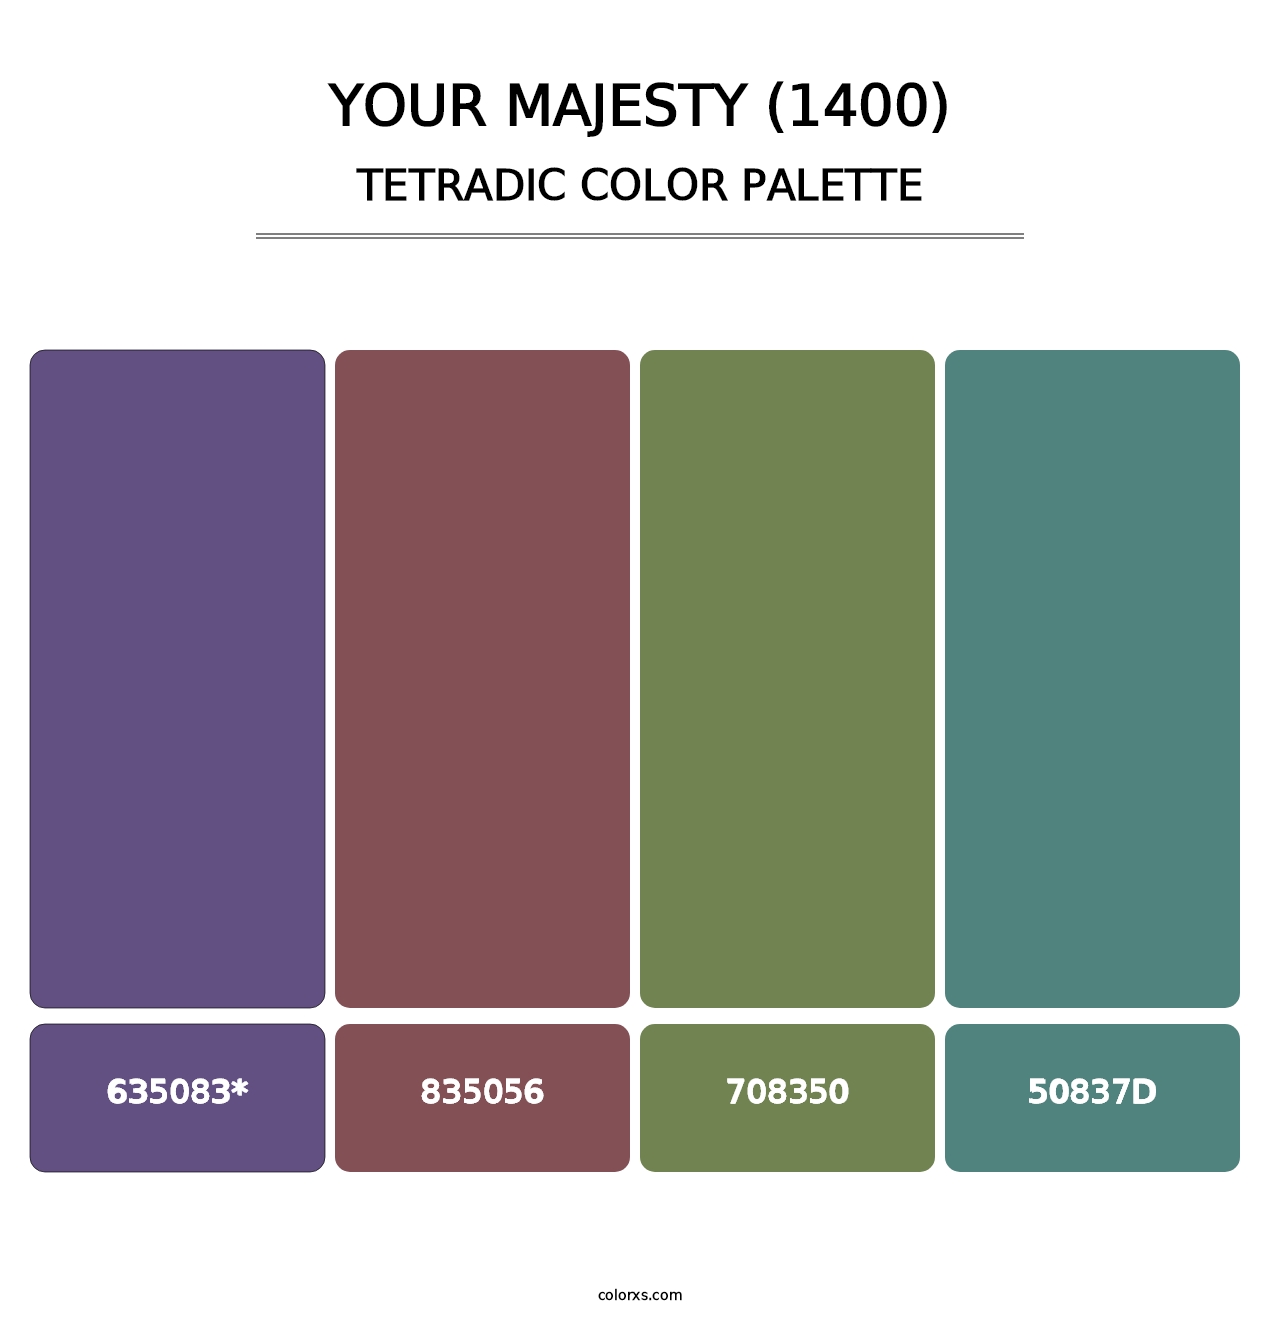 Your Majesty (1400) - Tetradic Color Palette